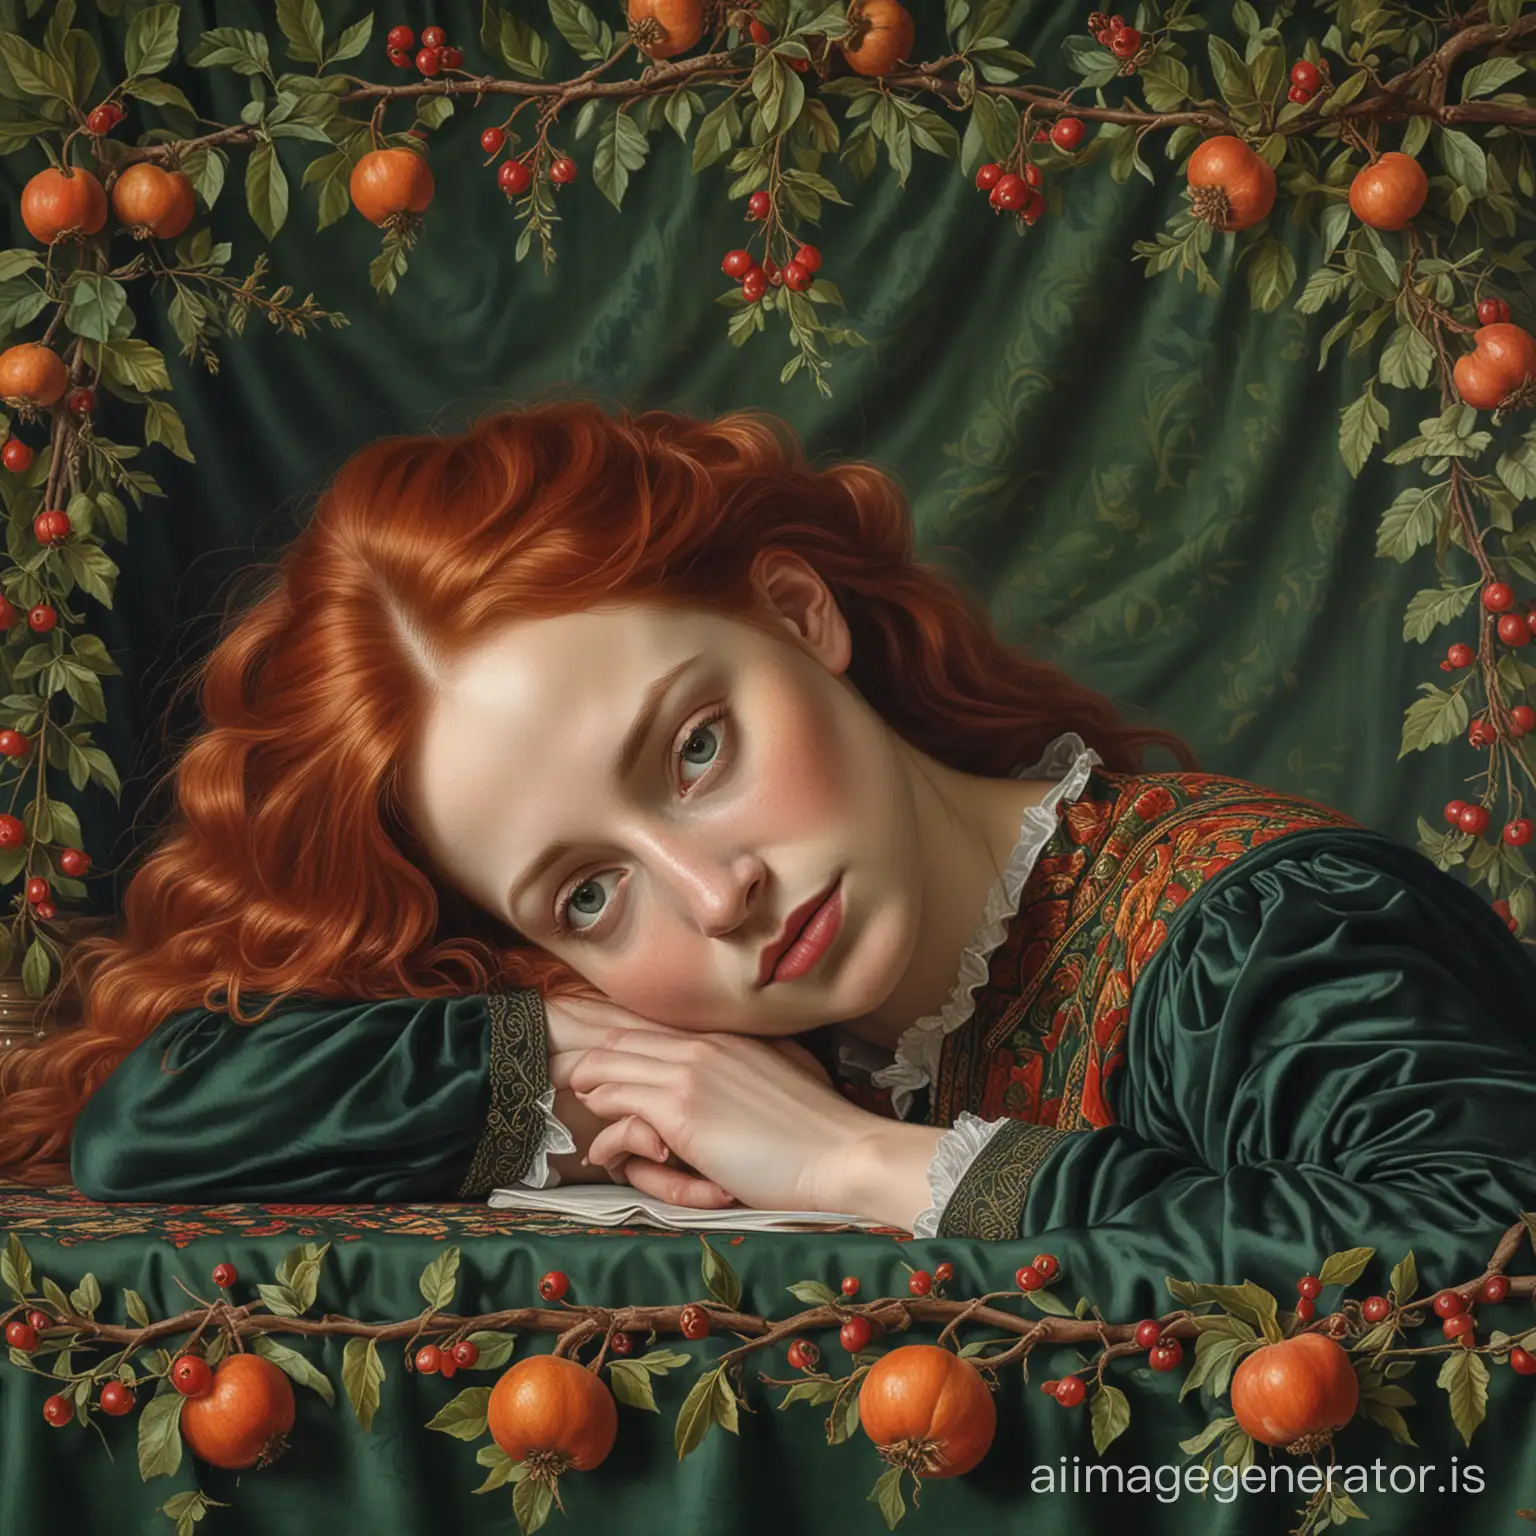 PreRaphaelite-Painting-RedHaired-Woman-in-Green-Velvet-Dress-with-Floral-Still-Life